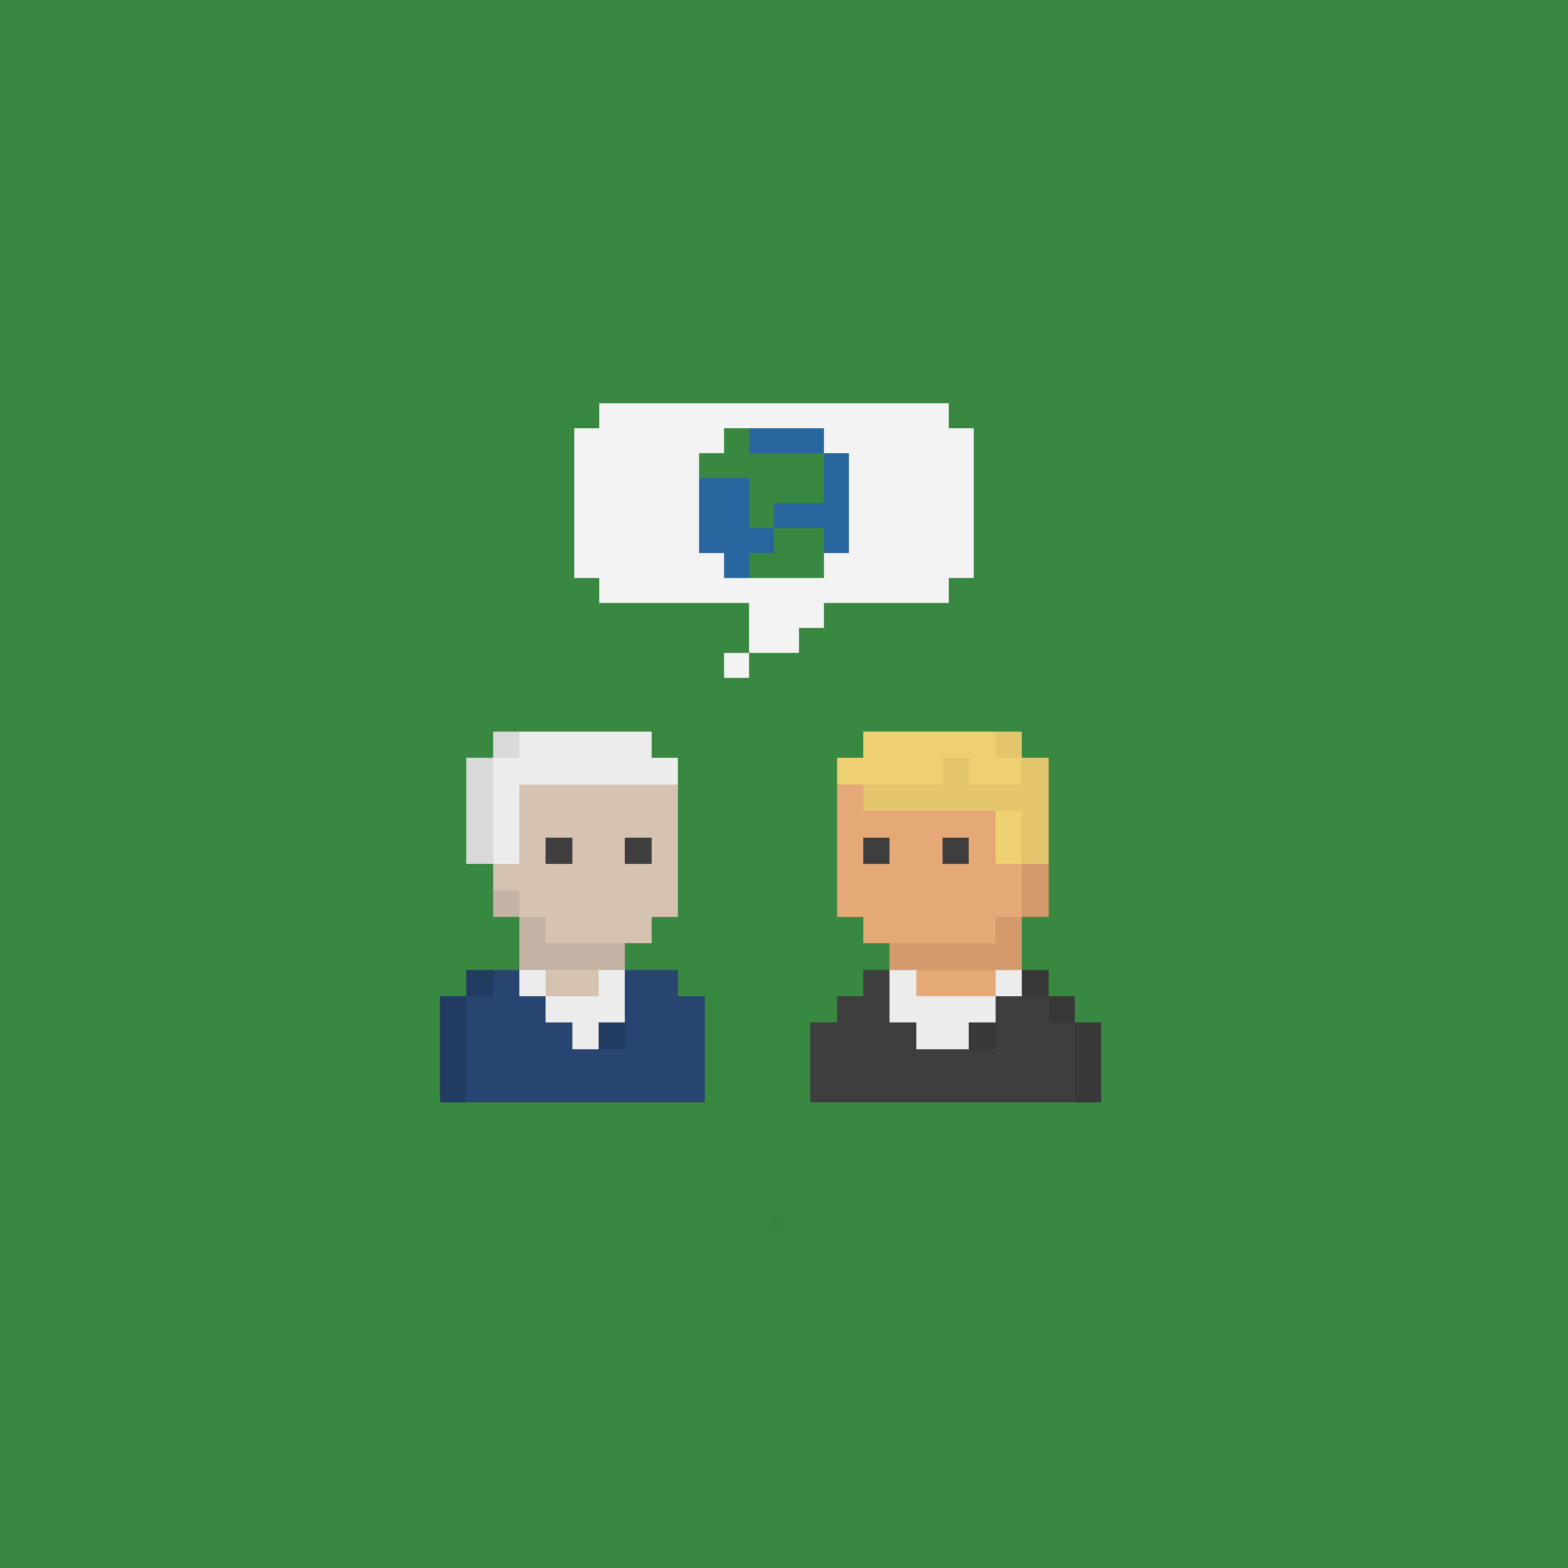 Biden and Trump standoff, a speech bubble with a Earth floats above